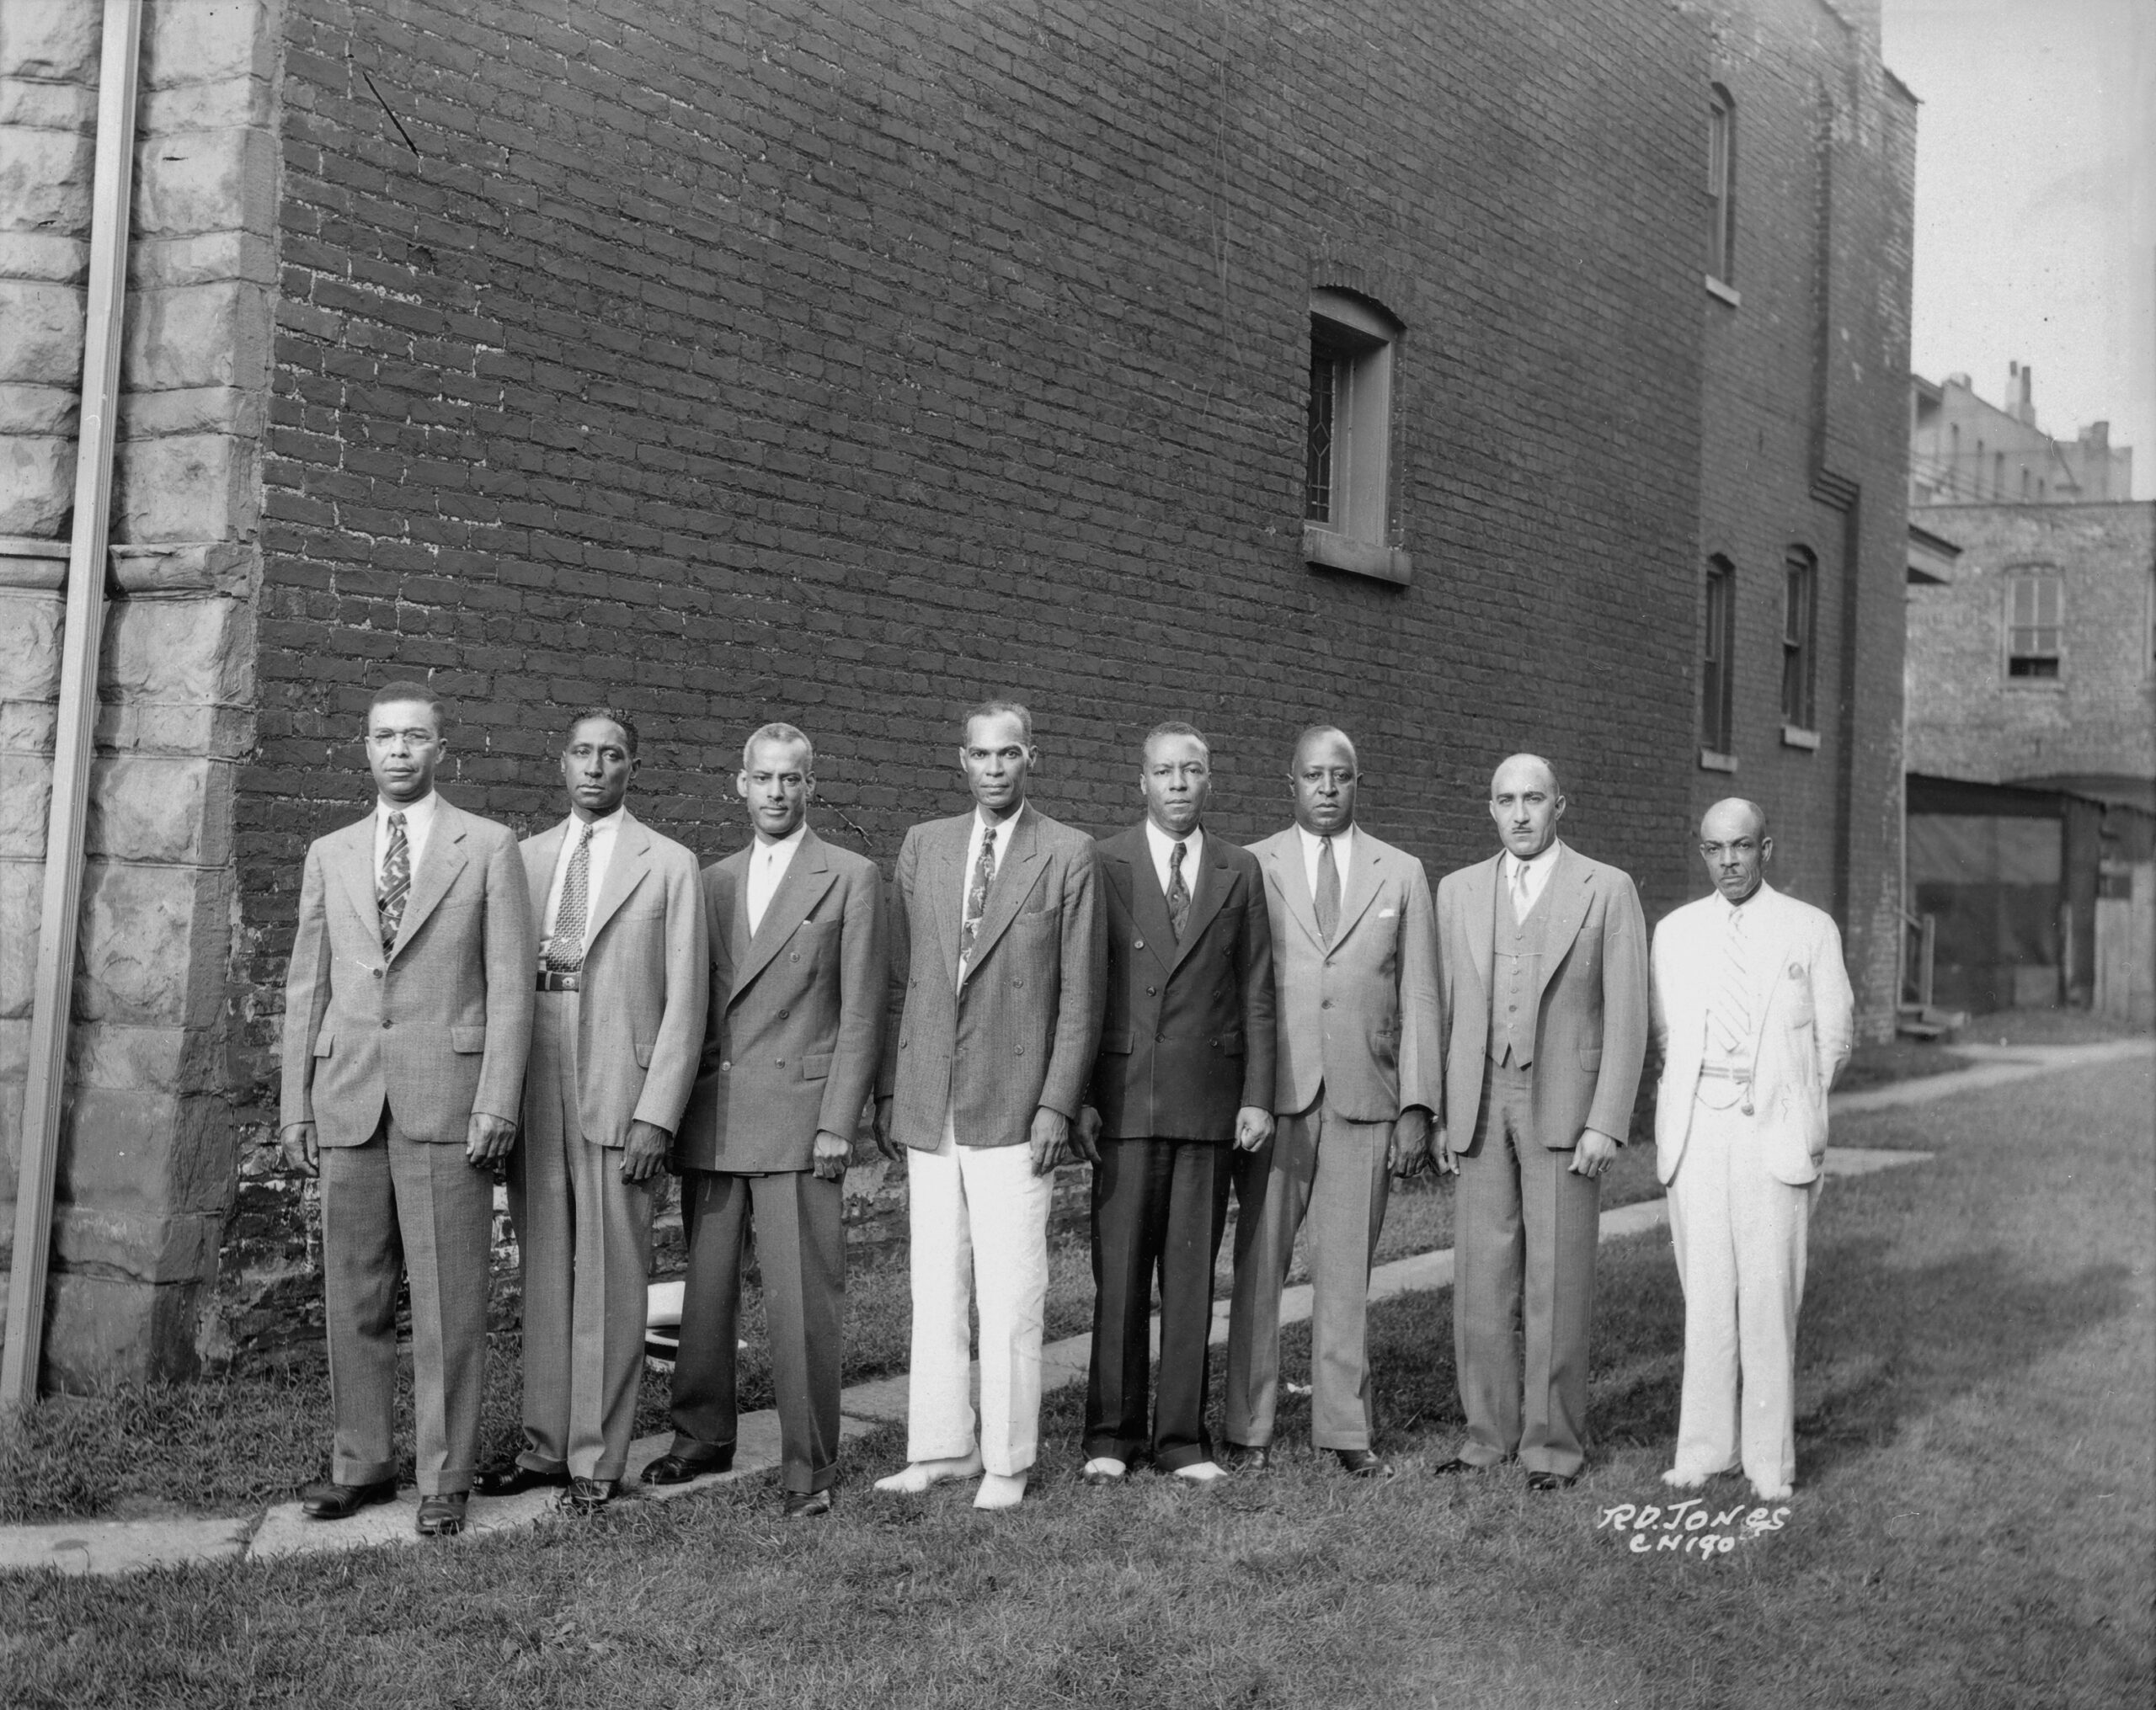 Photograph of eight officers of the Brotherhood of Sleeping Car Porters standing in a row